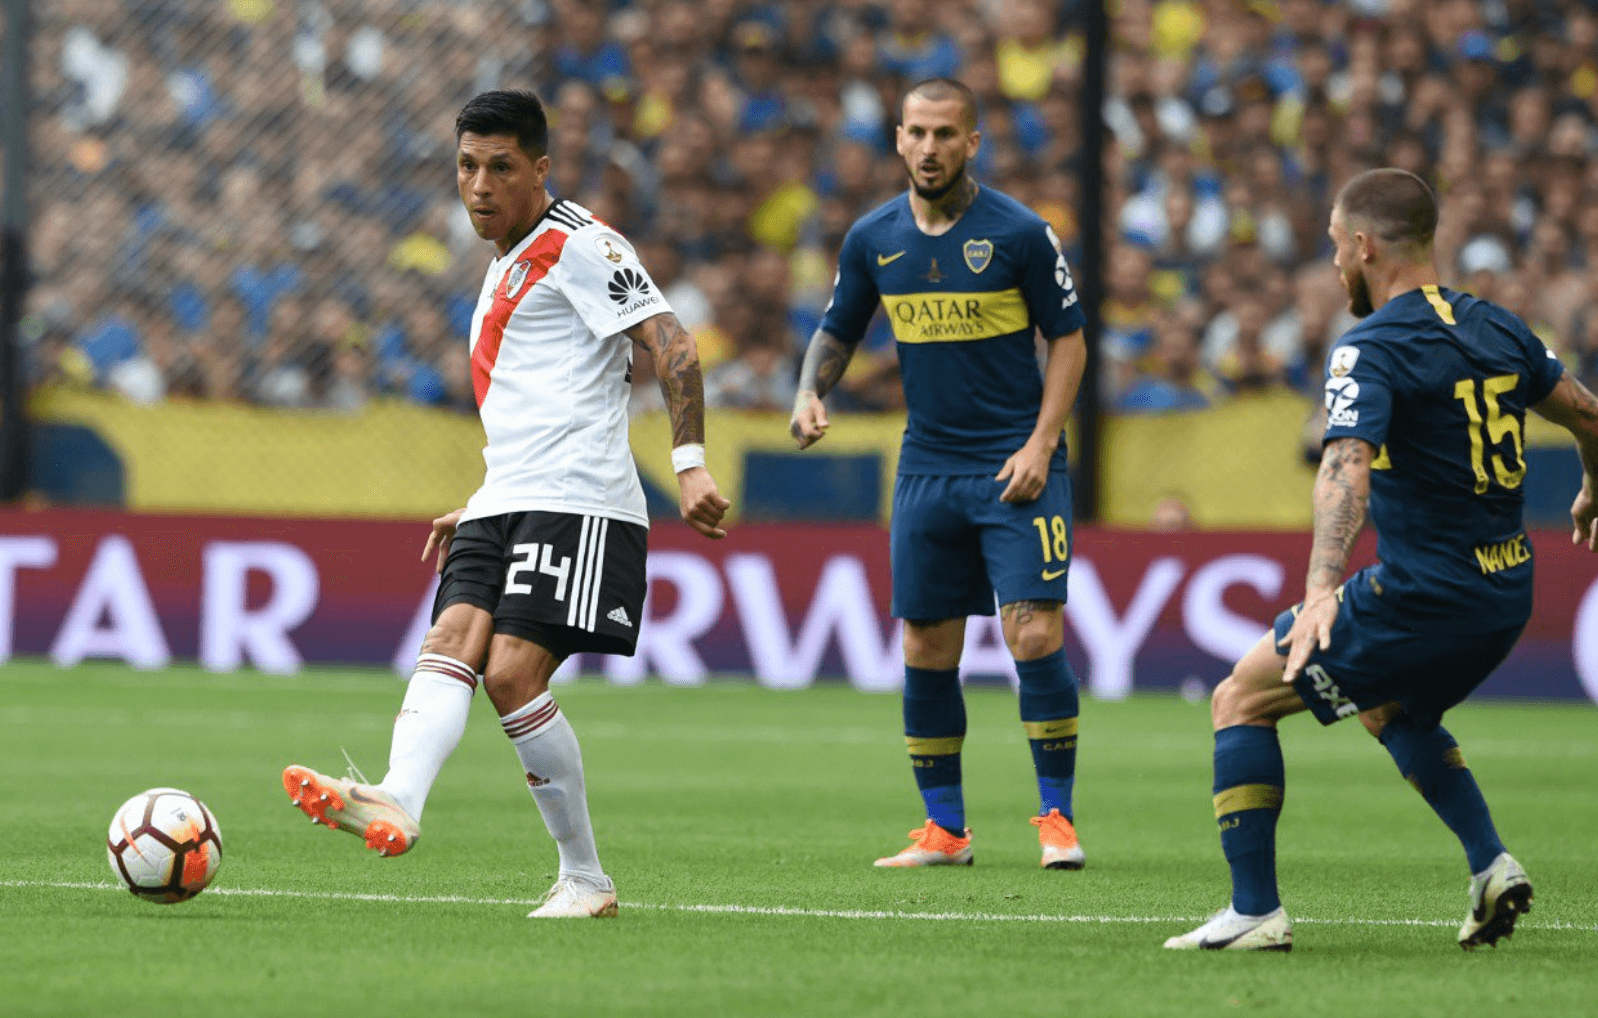 Copa Libertadores final will be played outside of Argentina on Dec. 8 or 9